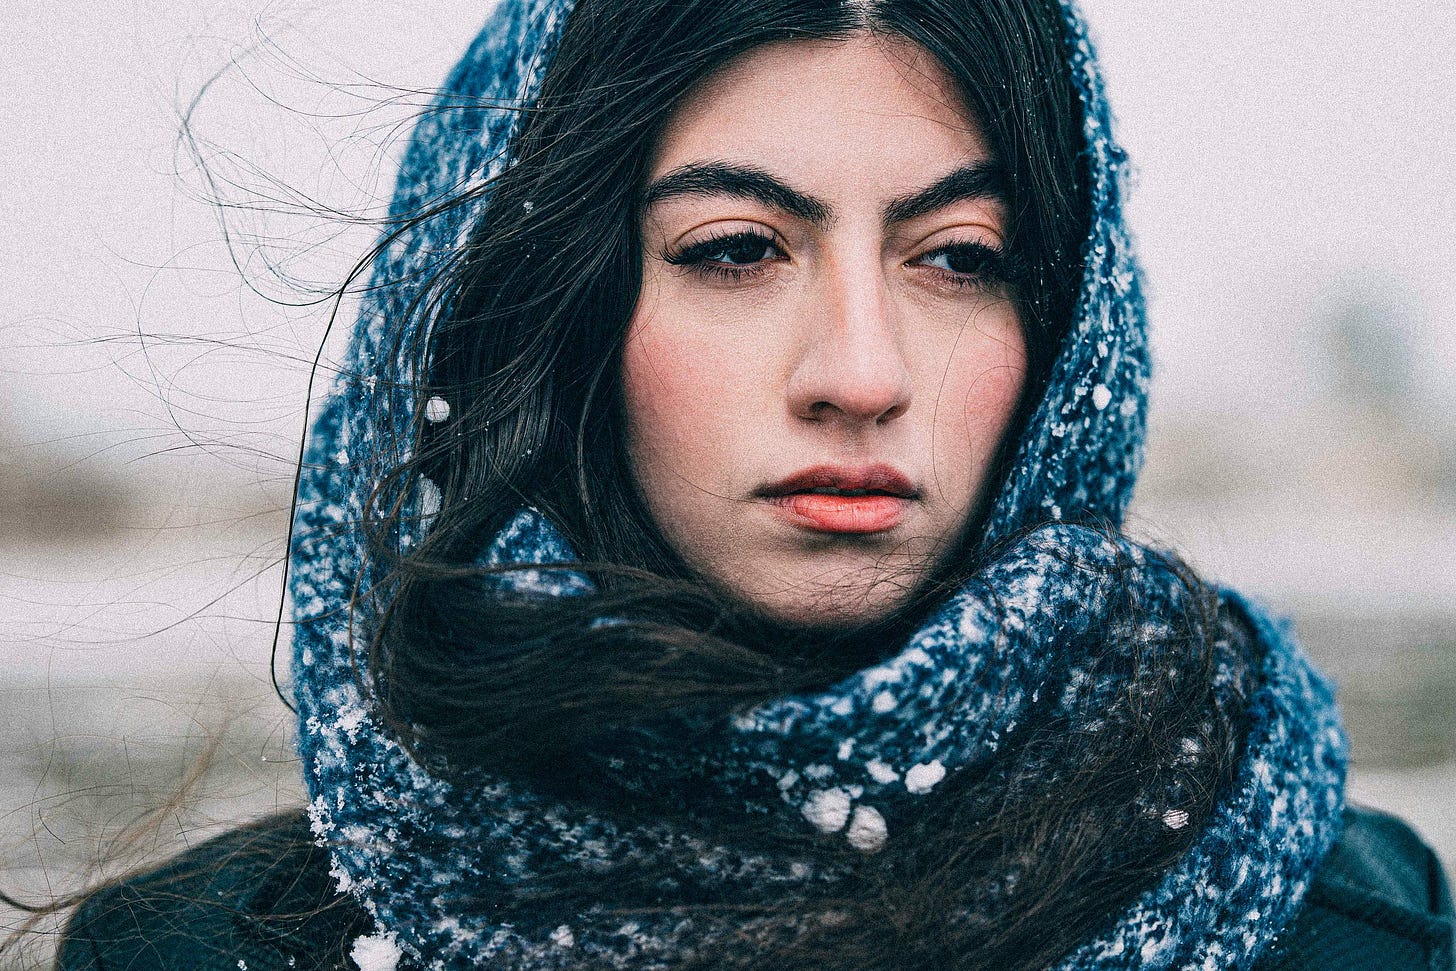 Woman with a blue scarf wrapped around her hair